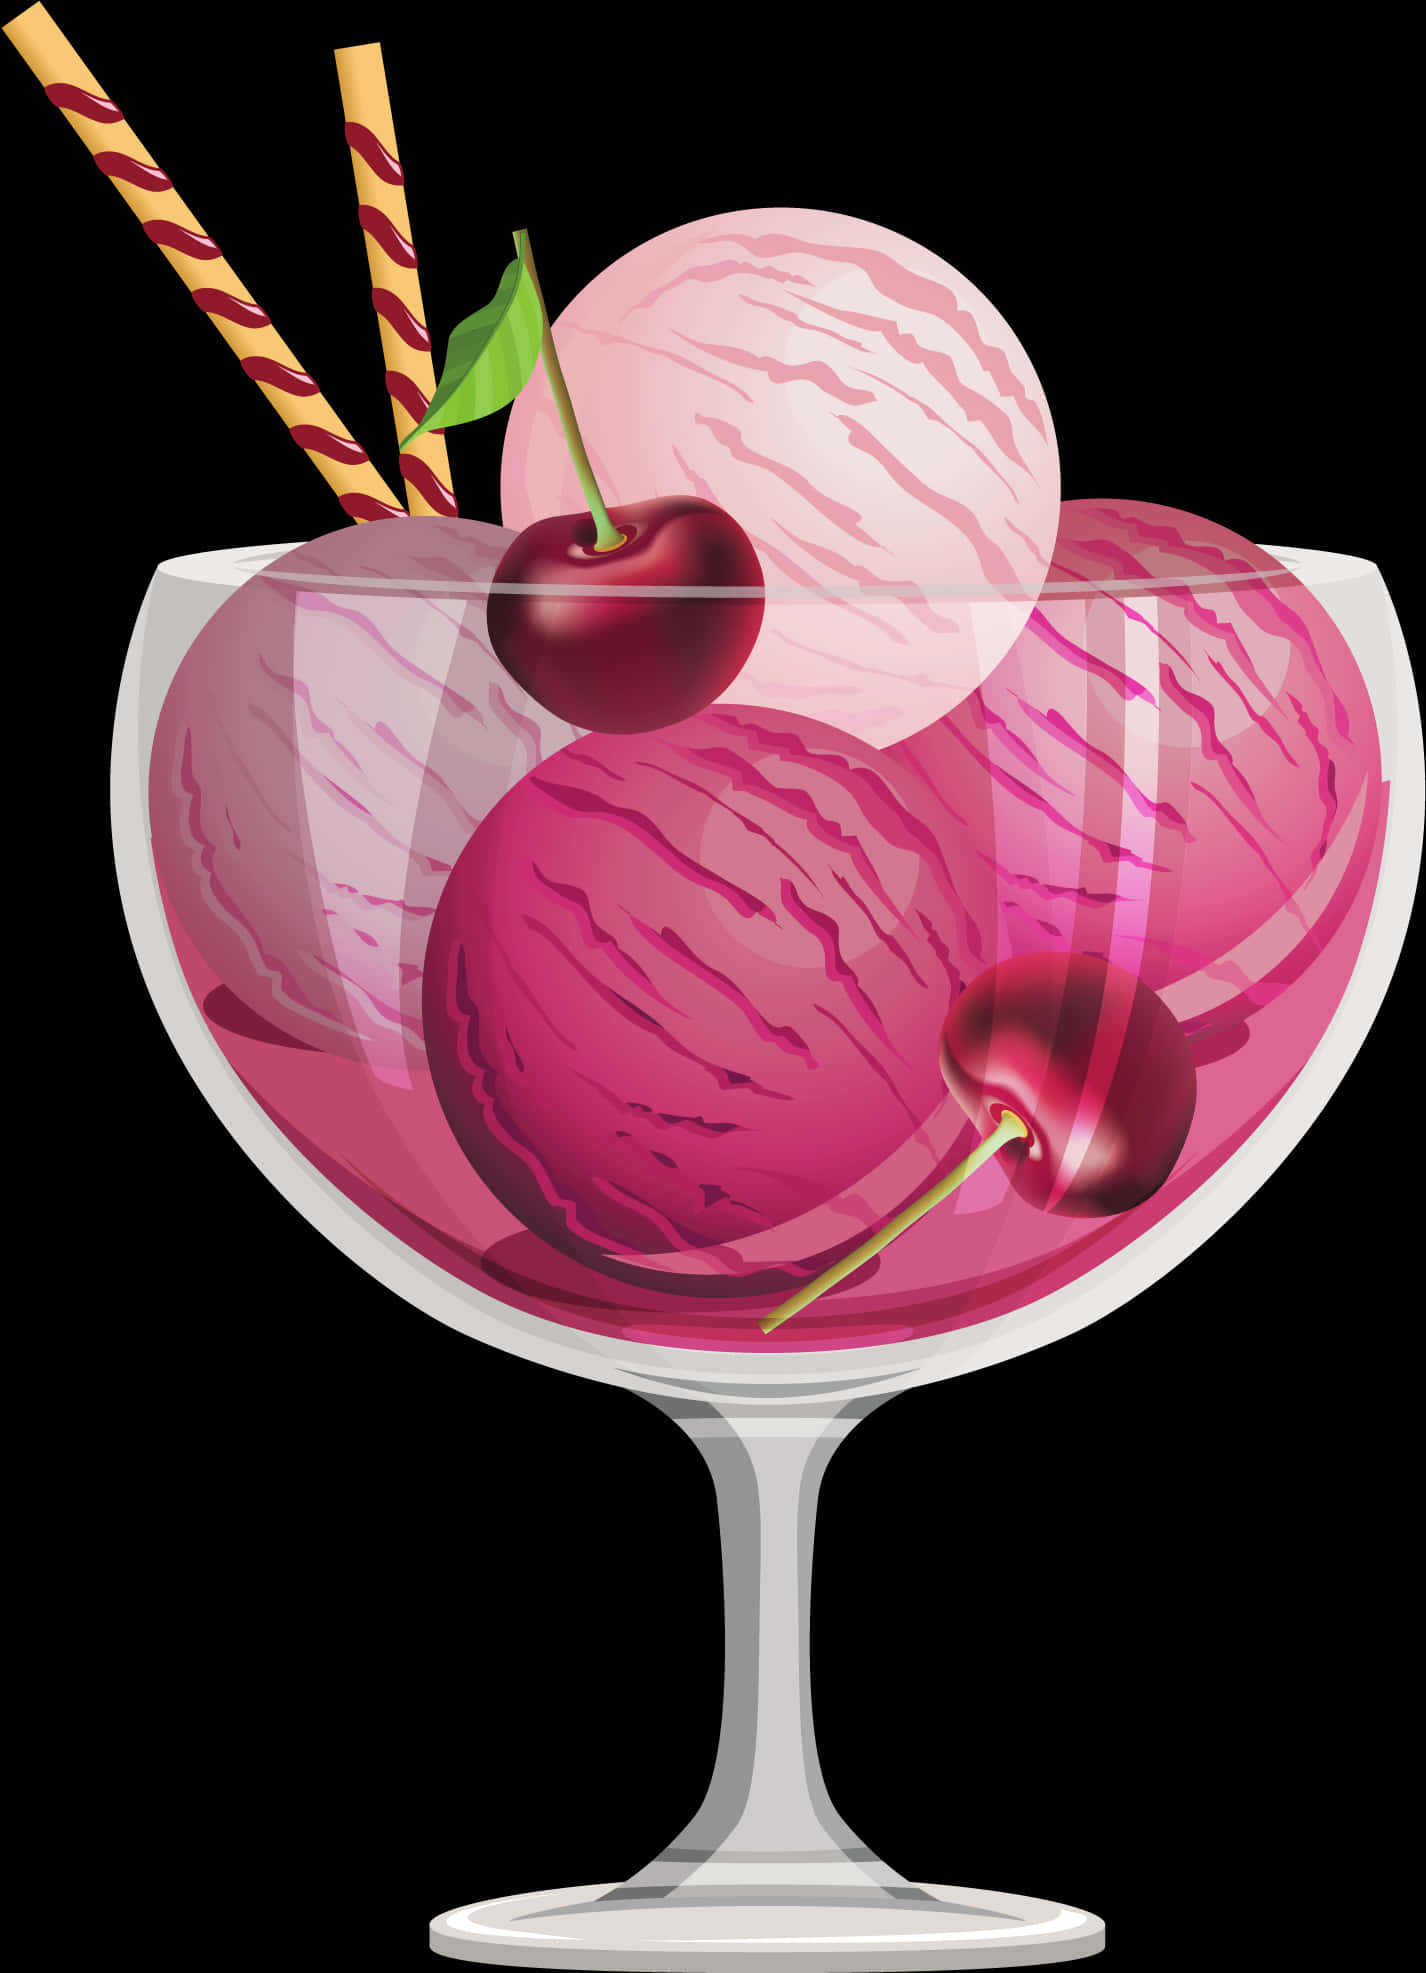 A Glass Of Ice Cream With Cherries And Straws